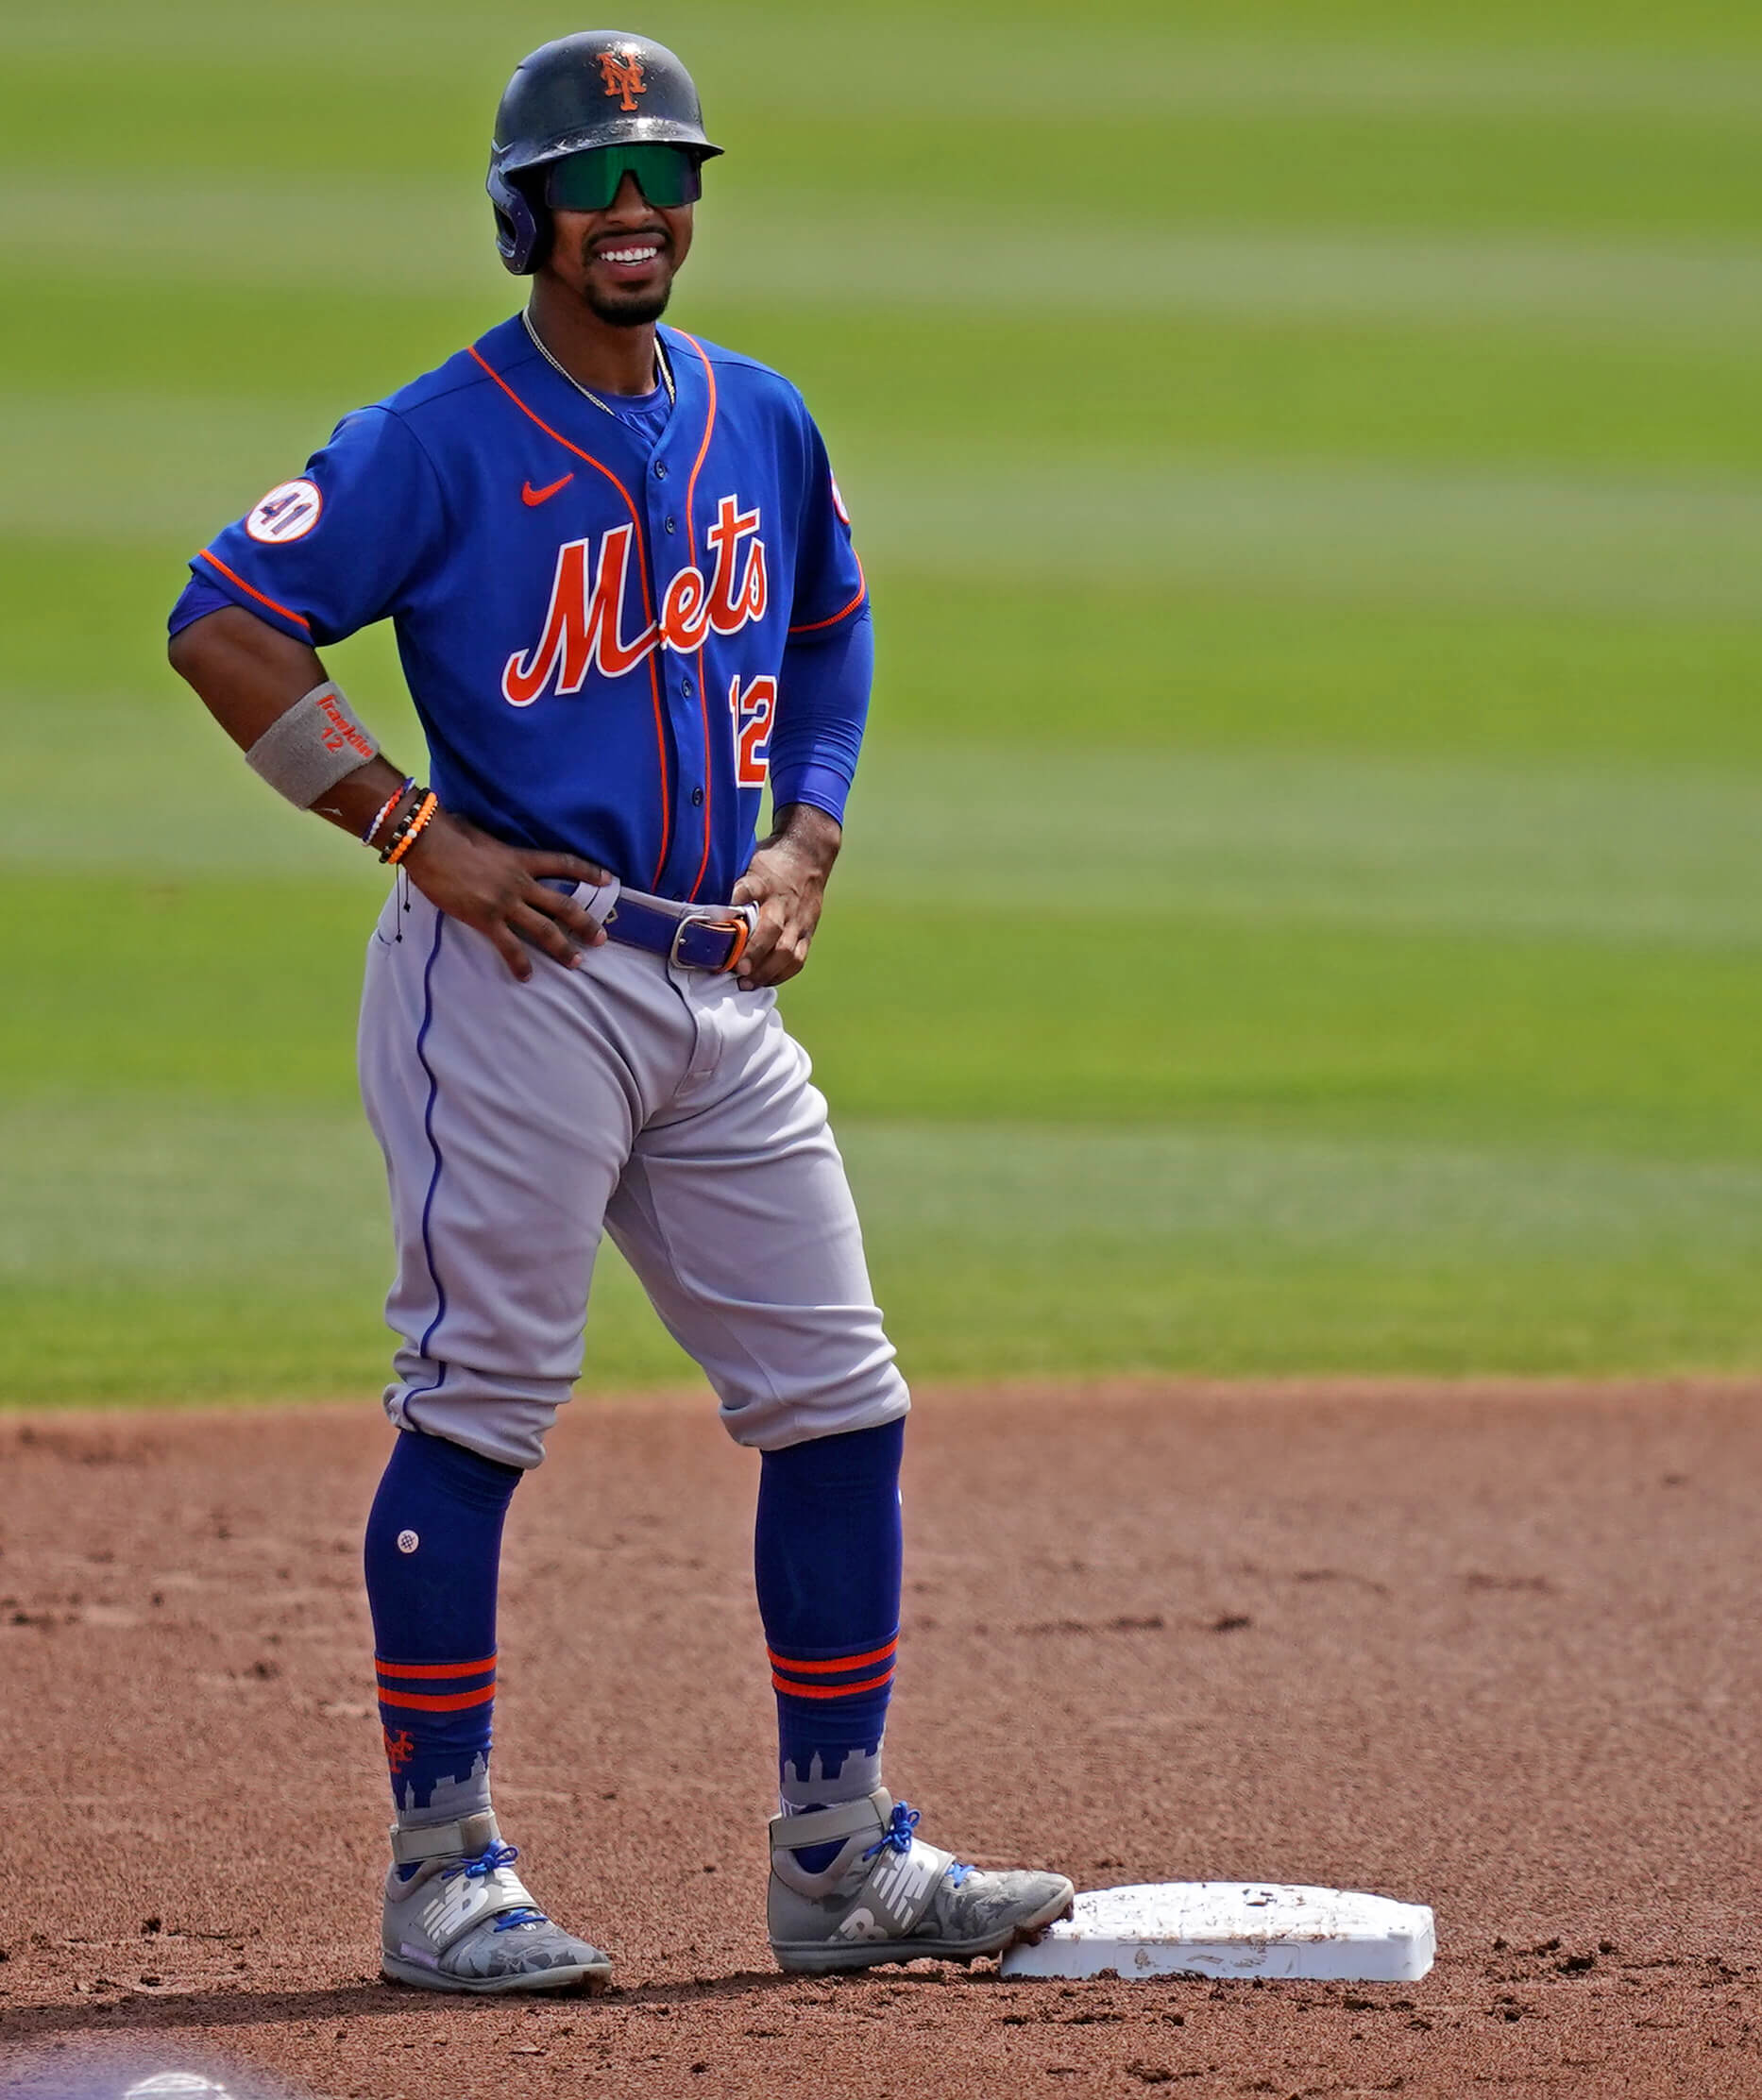 How Mets' Francisco Lindor used key tenets to get back into swing - Monday,  May 16, 2022 - CapperTek